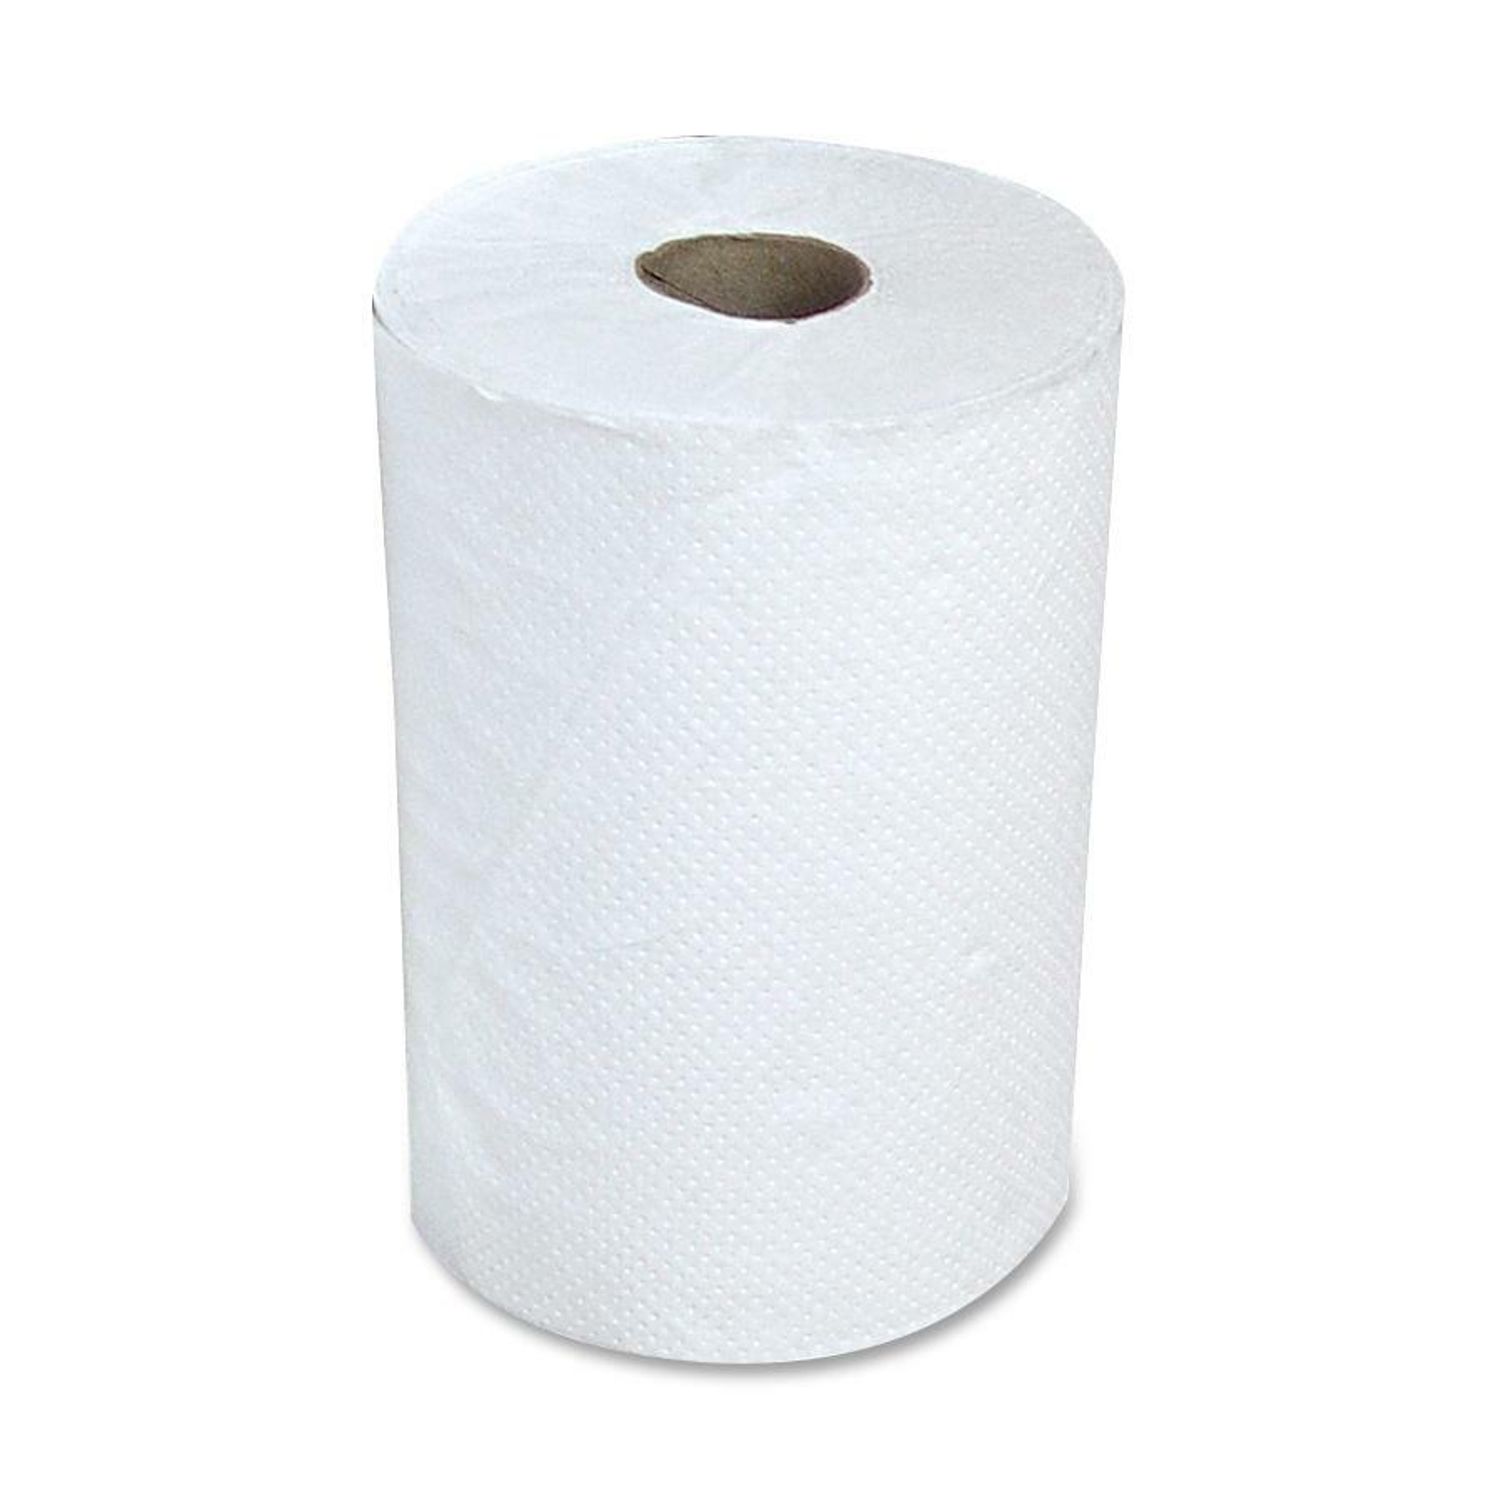 Hardwound White Paper Towels 1 Ply, 5.50" Roll Diameter, White, Paper, Strong, Absorbent, Embossed, 12 / Carton